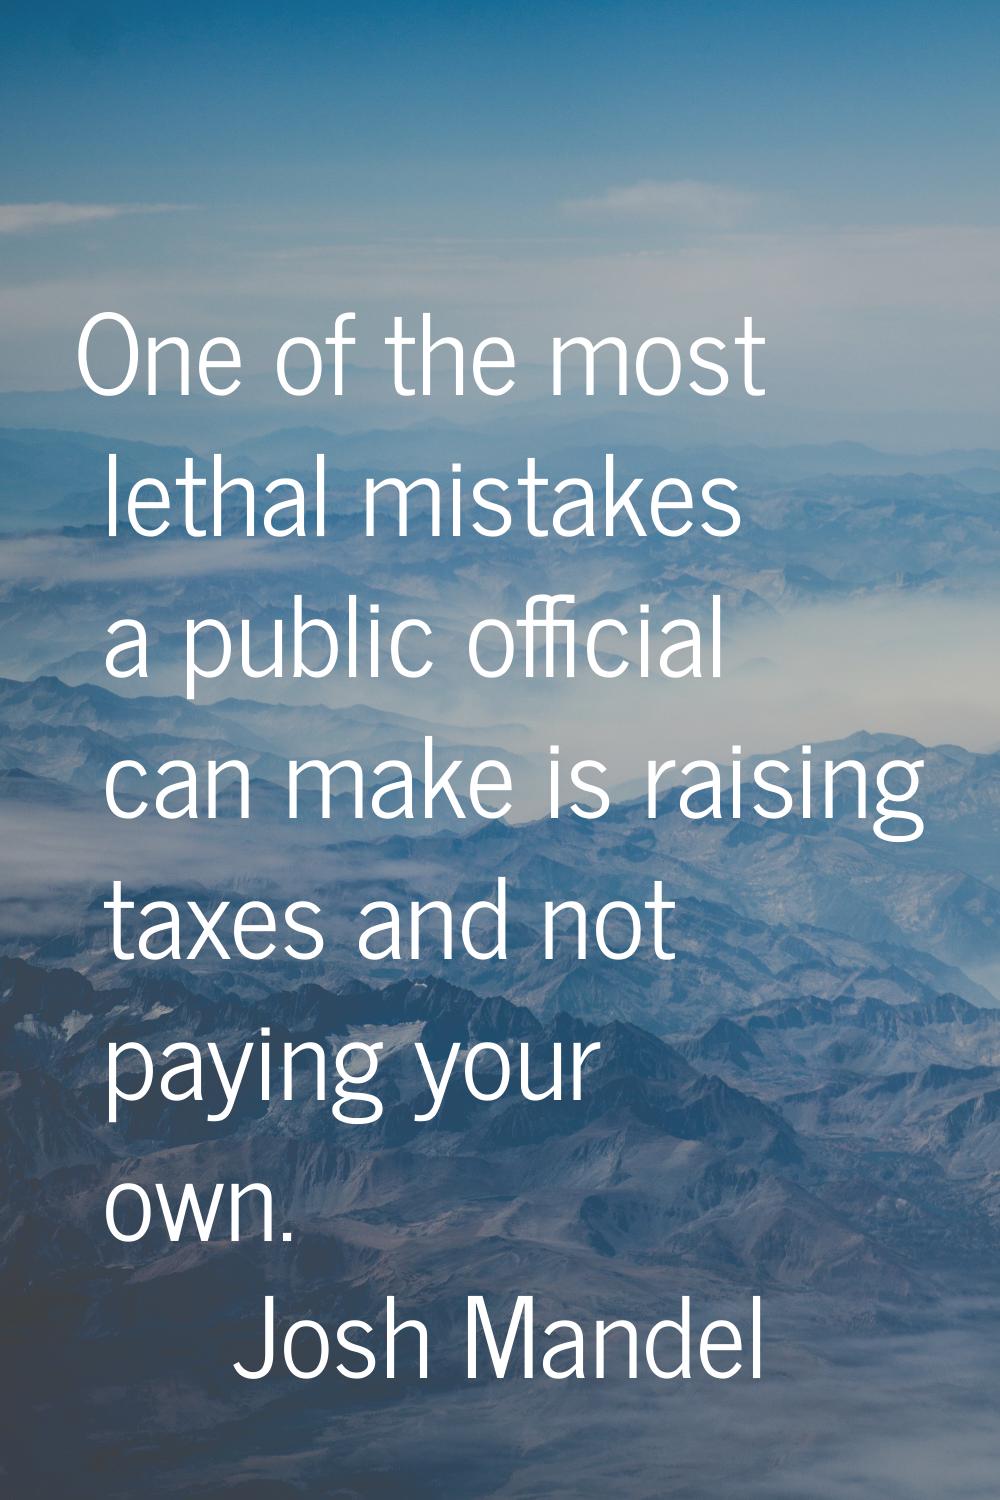 One of the most lethal mistakes a public official can make is raising taxes and not paying your own